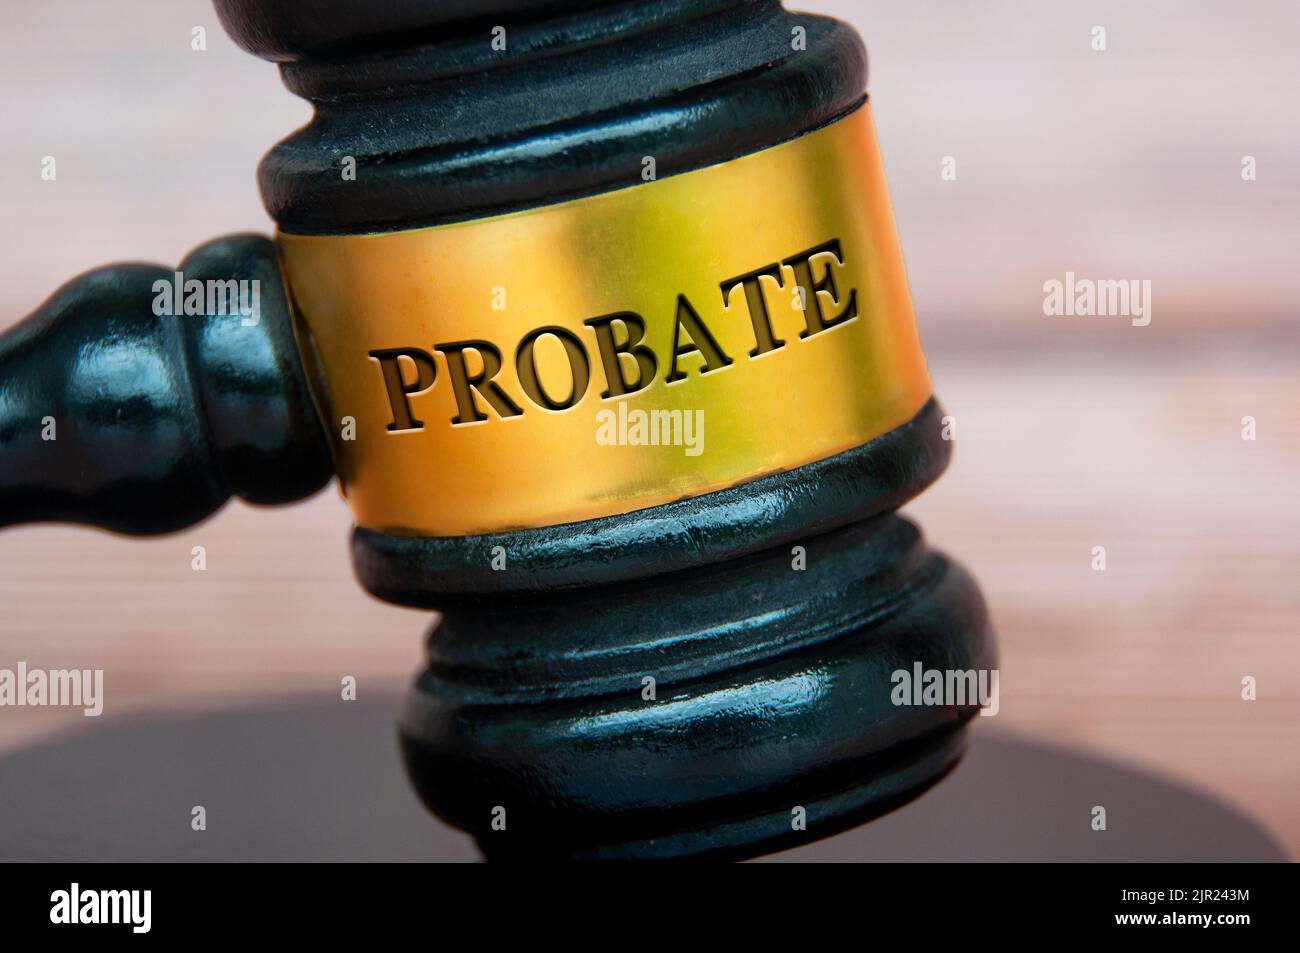 Probate text engraved on gavel with blurred wooden cover background. Legal and law concept. Stock Photo